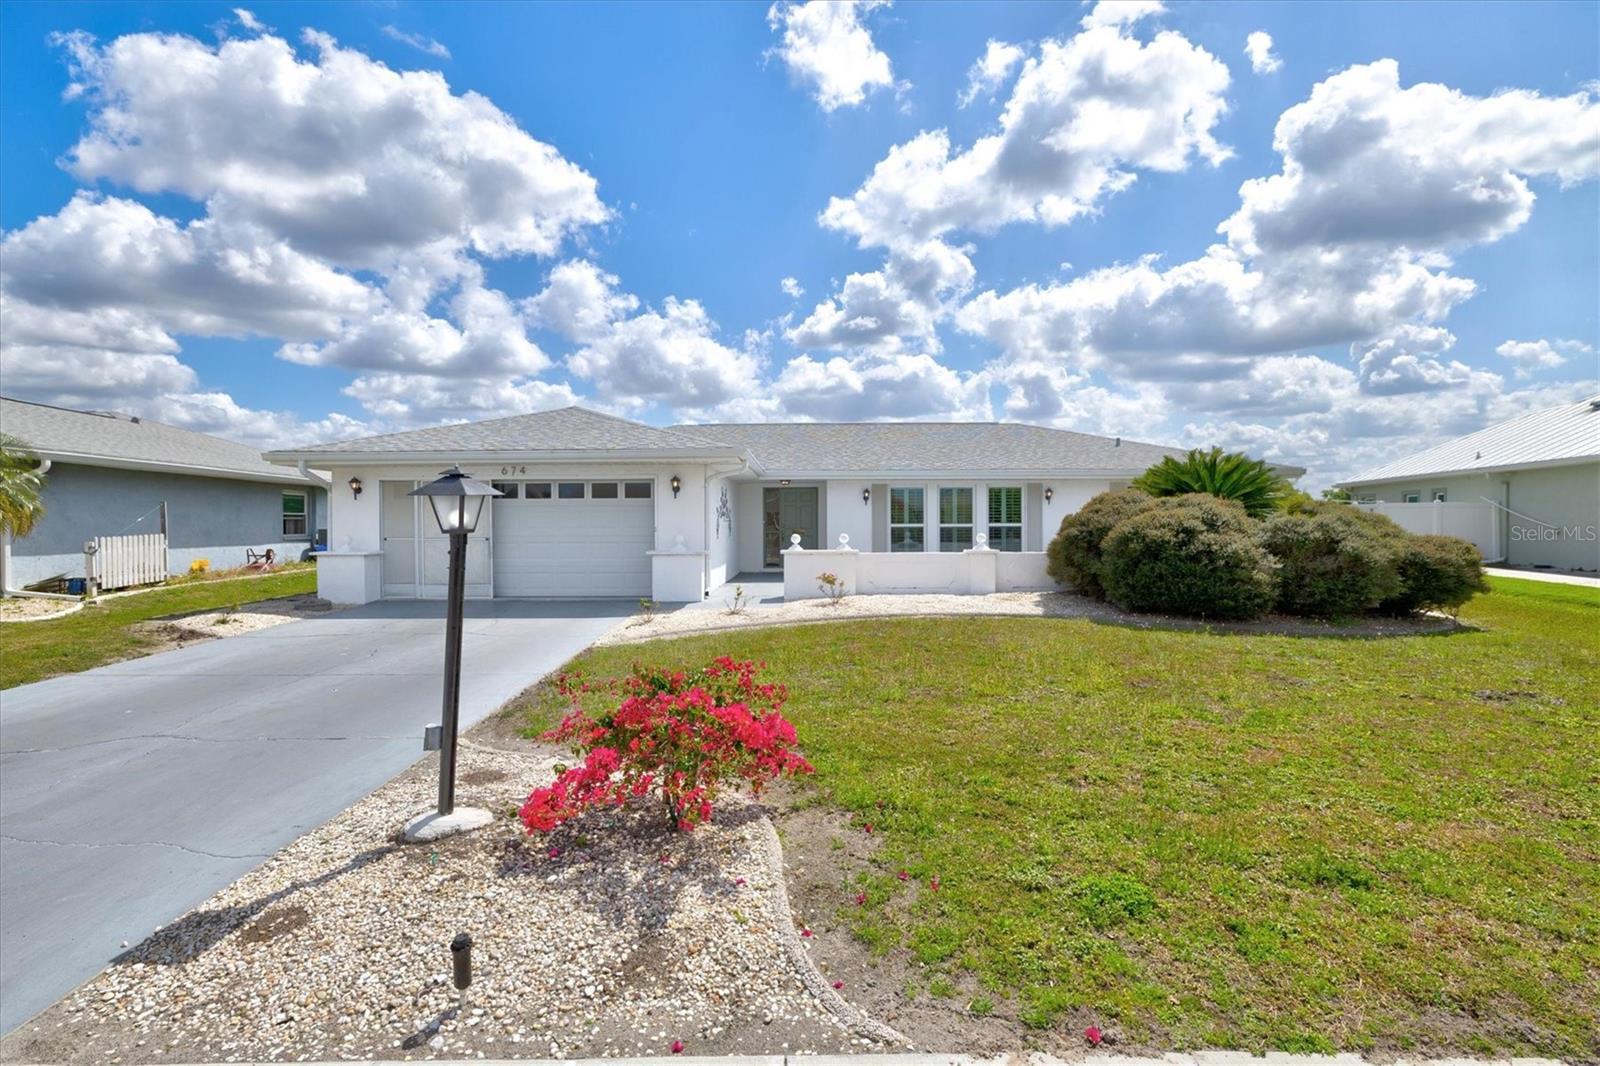 Photo one of 674 Allegheny Dr Sun City Center FL 33573 | MLS A4601277